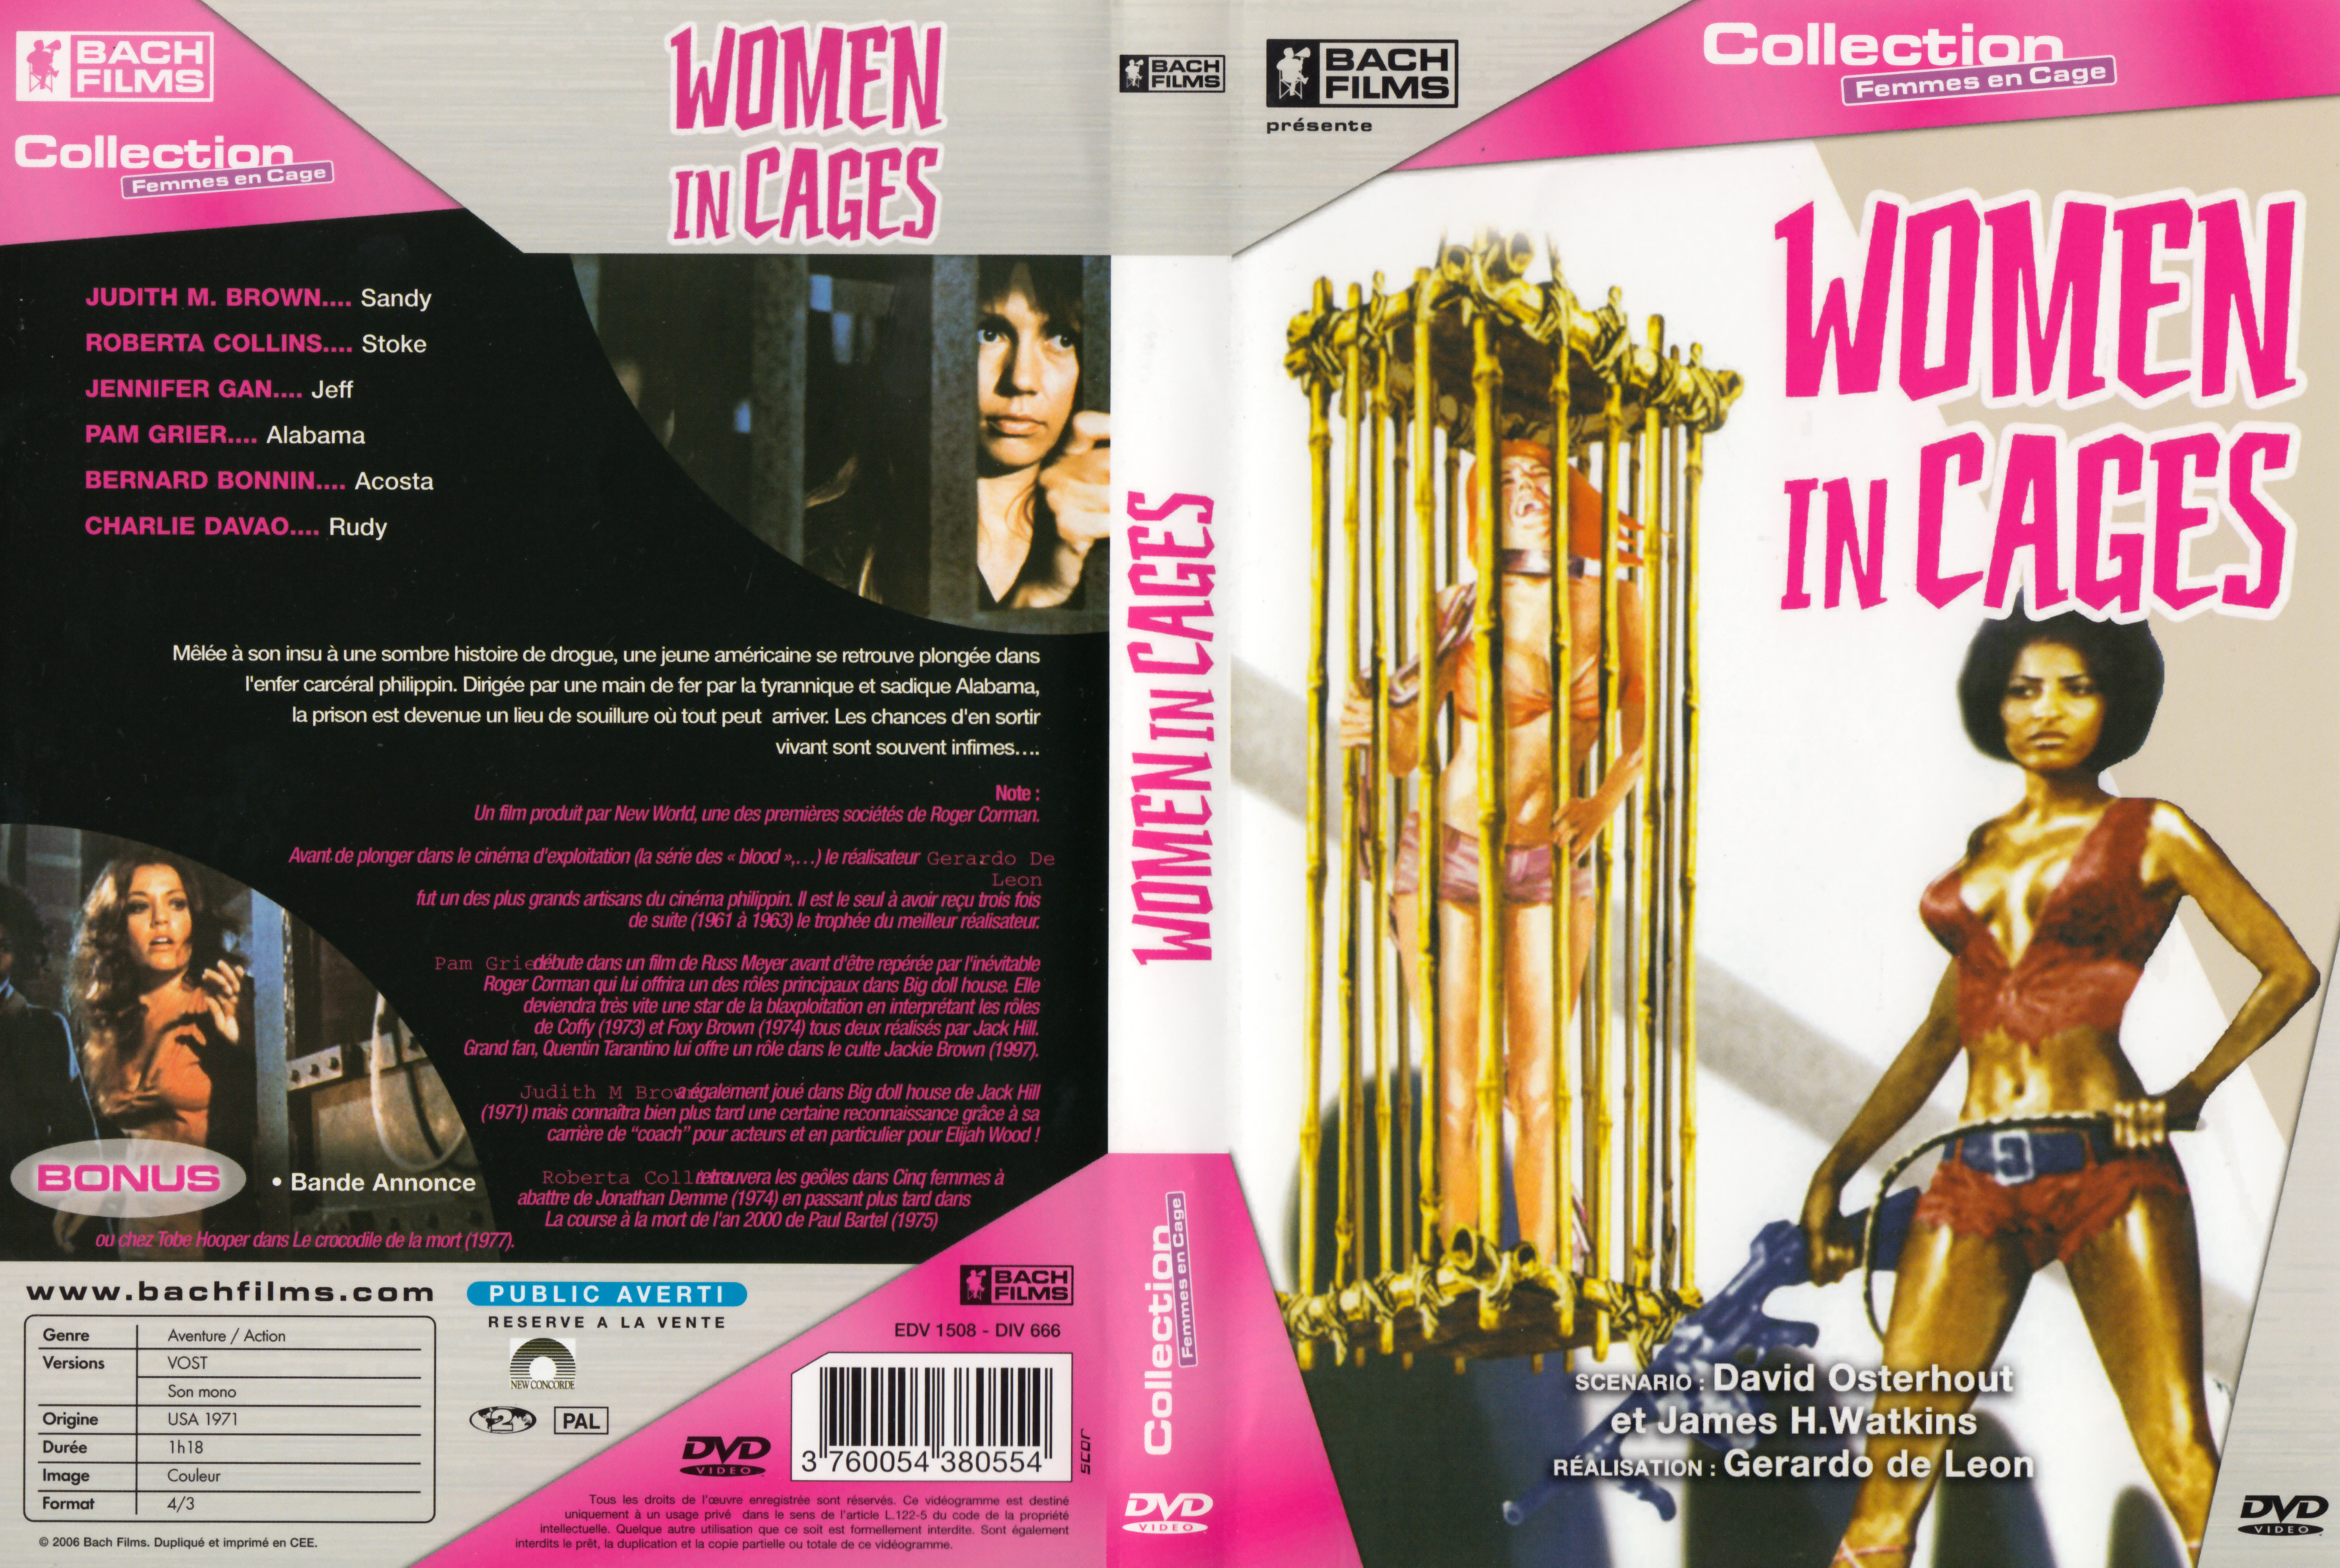 Jaquette DVD Women in cages